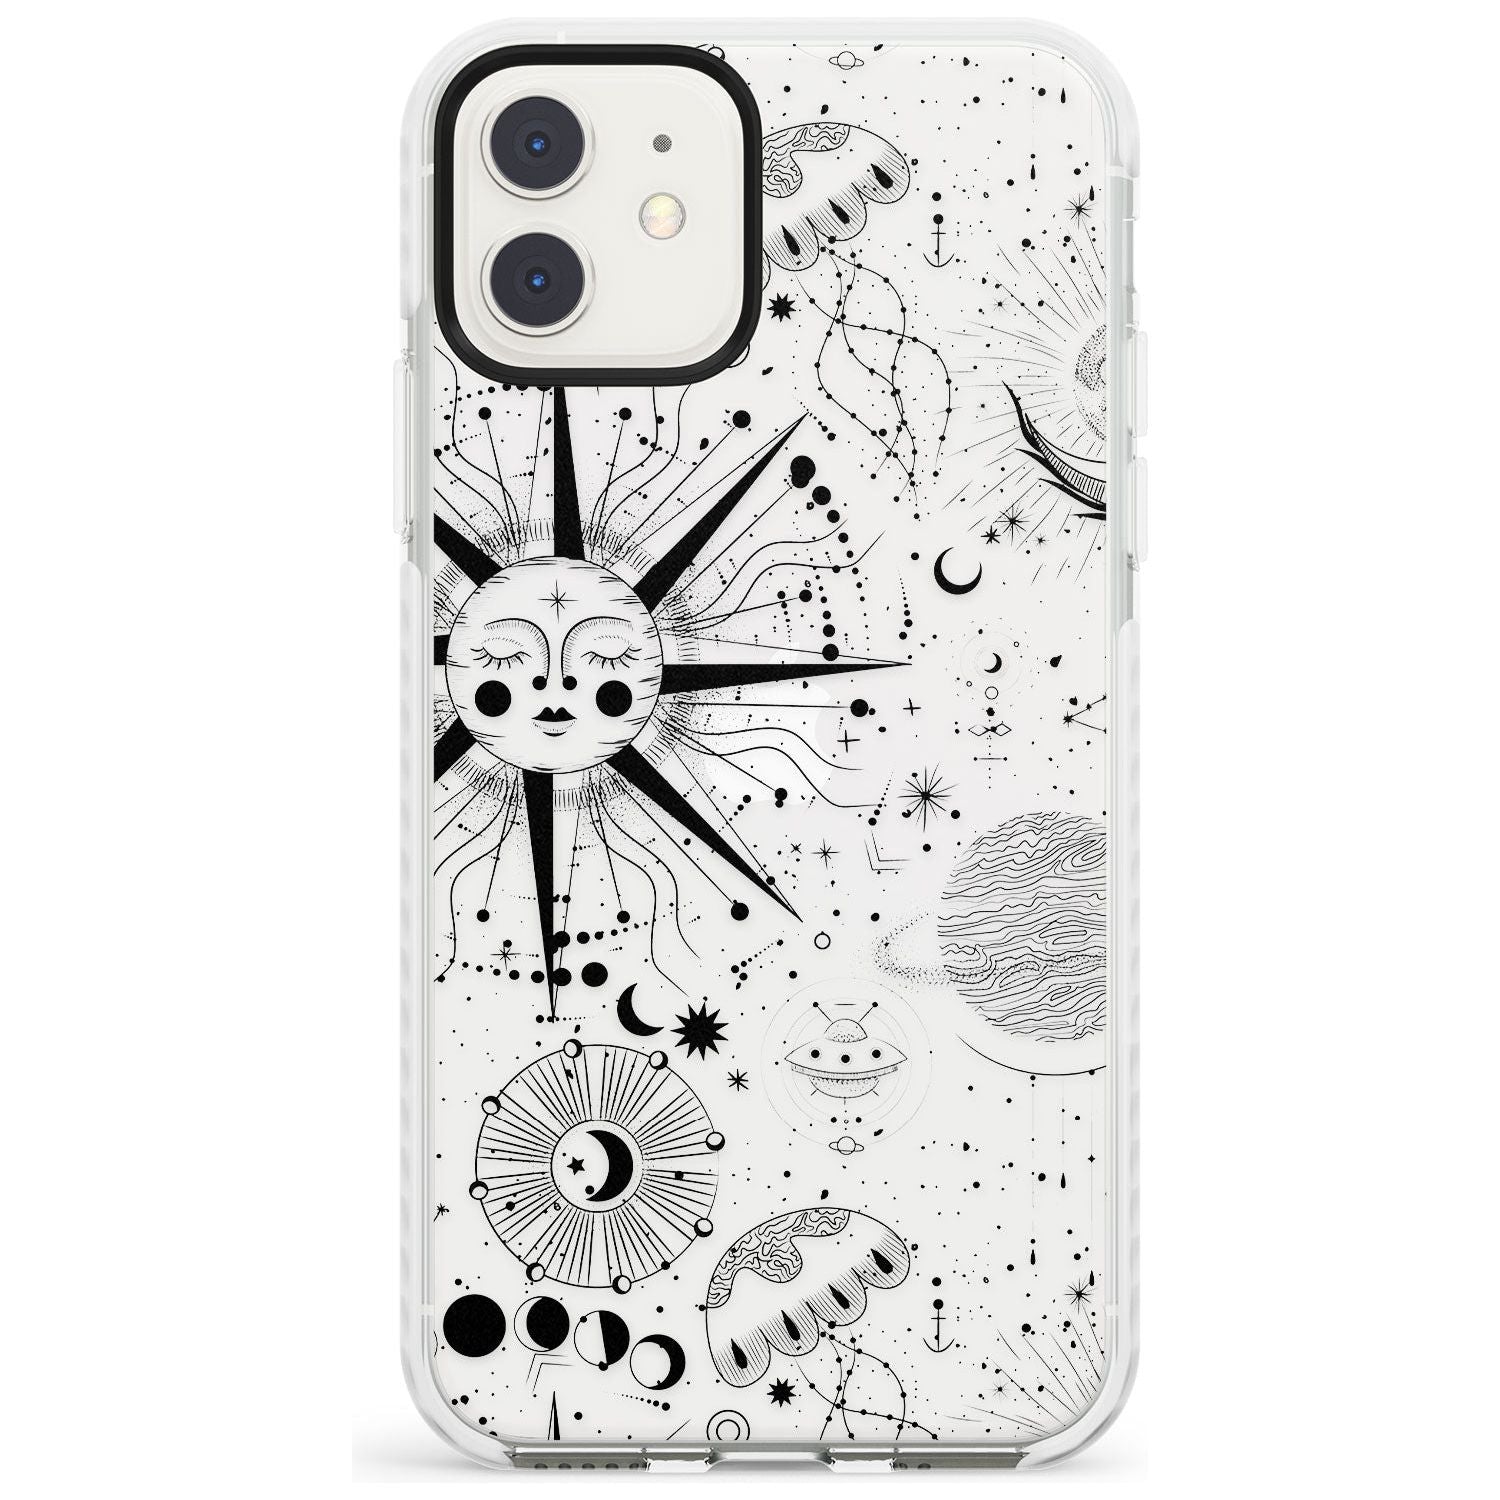 Large Sun Vintage Astrological Impact Phone Case for iPhone 11